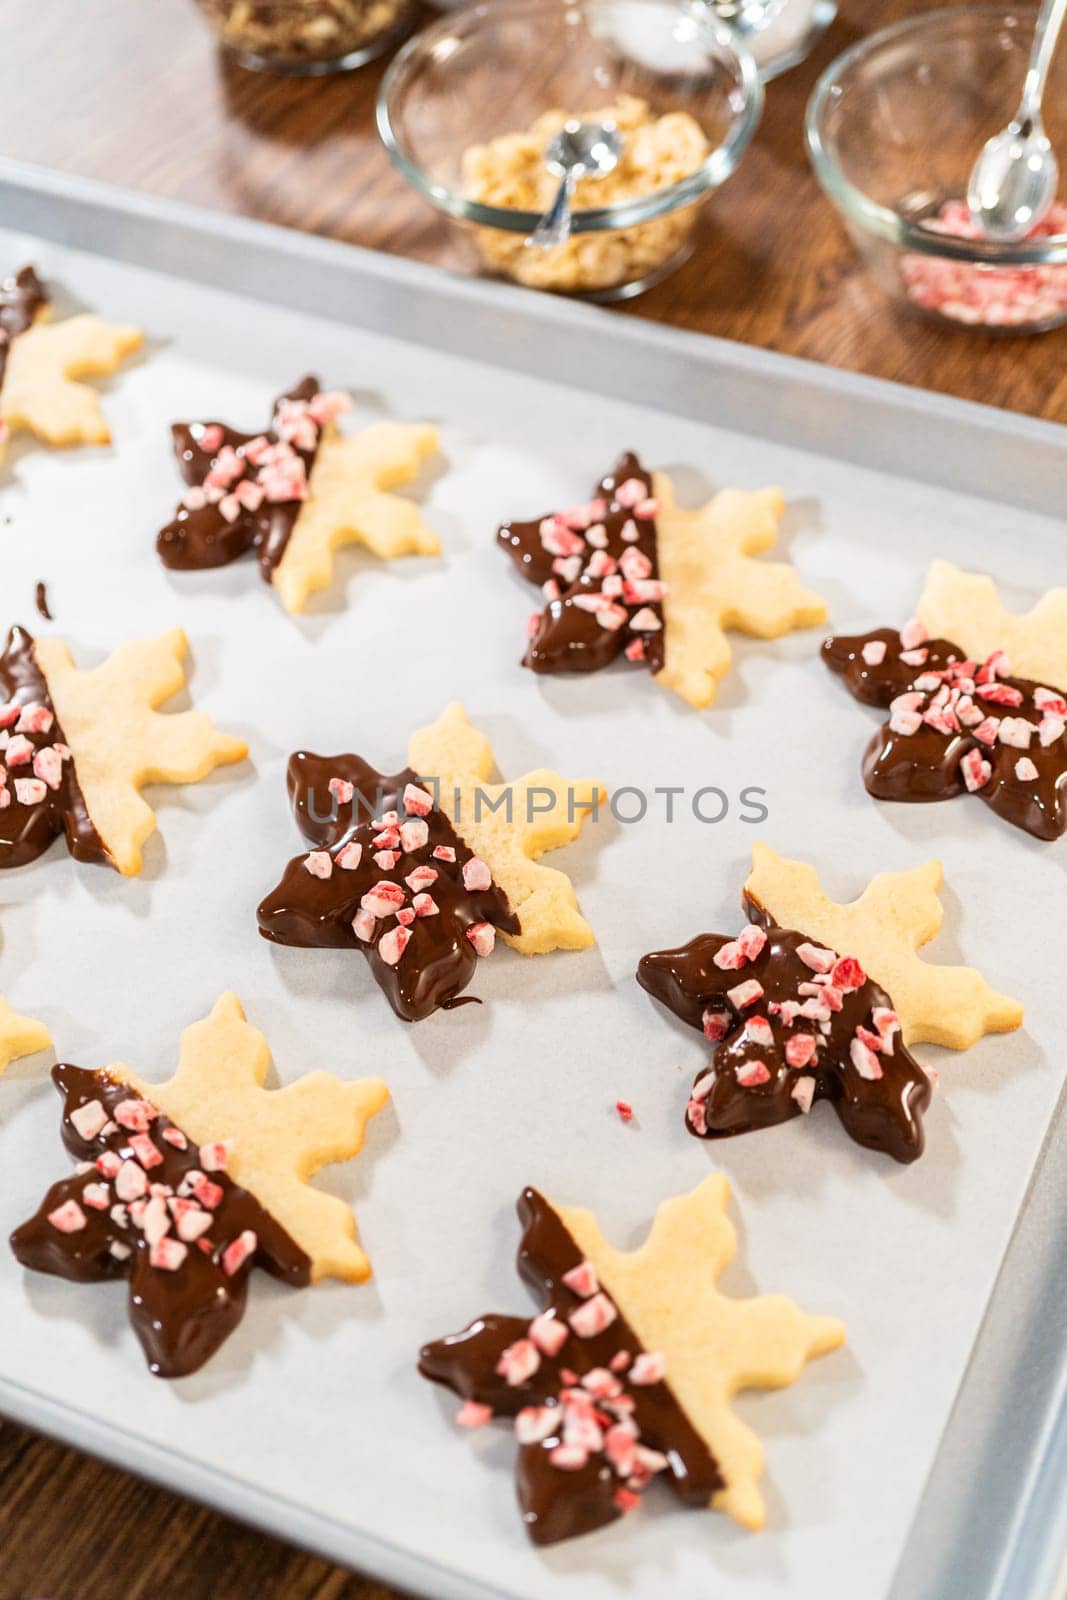 Making Star-Shaped Cookies with Chocolate and Peppermint Chips by arinahabich